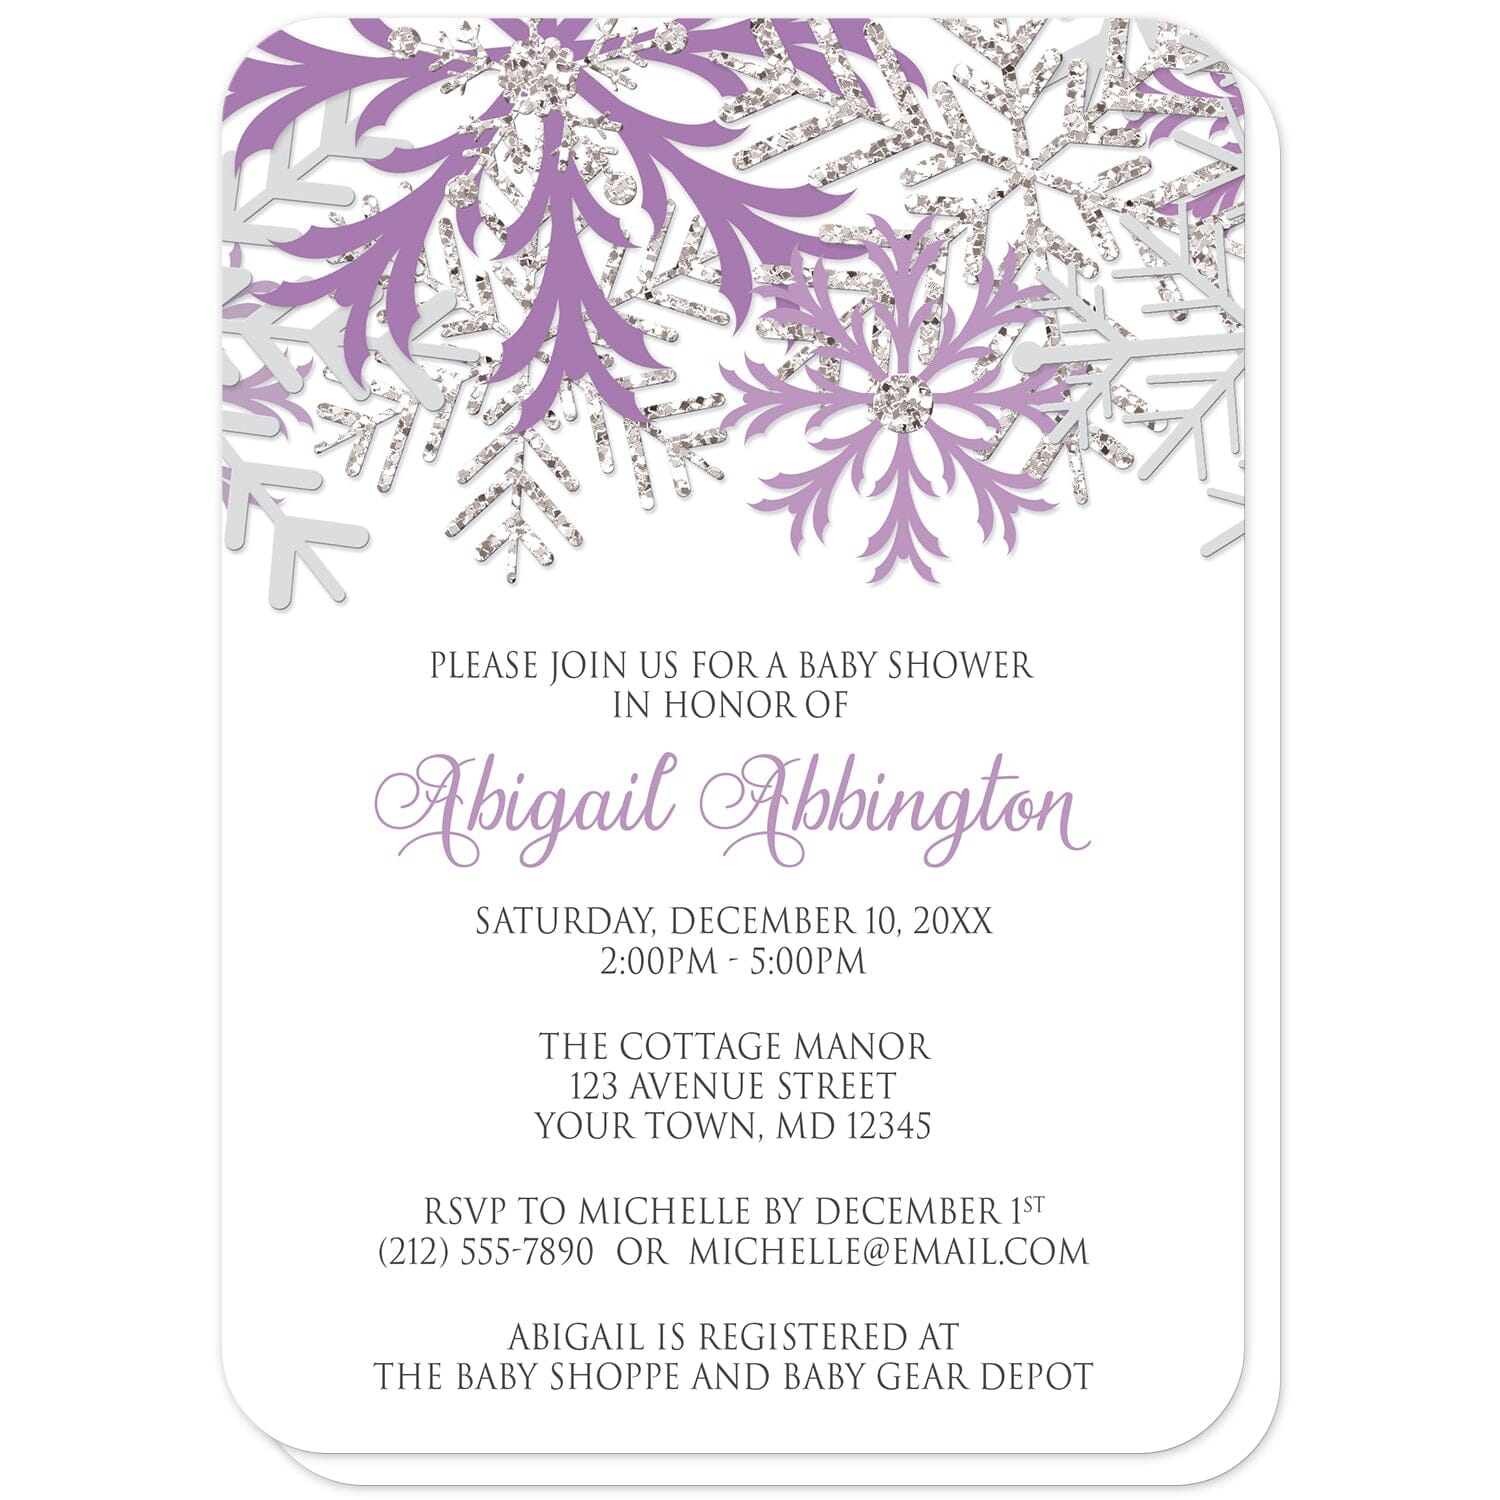 Winter Purple Silver Snowflake Baby Shower Invitations (with rounded corners) at Artistically Invited. Beautiful winter purple silver snowflake baby shower invitations designed with purple, light purple, silver-colored glitter-illustrated, and light gray snowflakes along the top over a white background. Your personalized baby shower celebration details are custom printed in purple and gray below the pretty snowflakes.